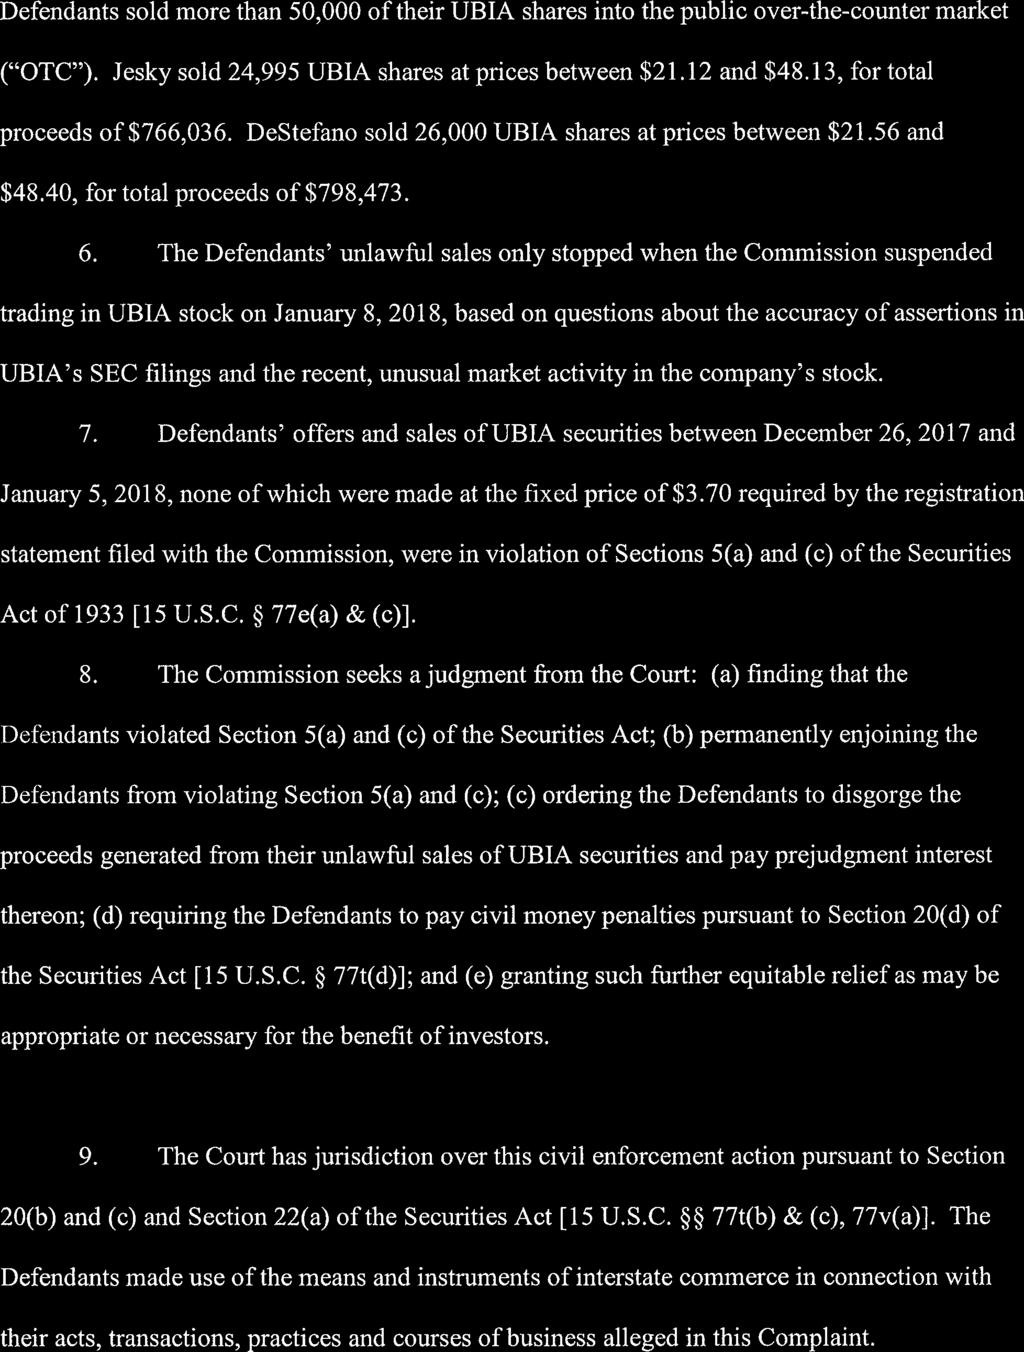 Case 1:18-cv-05980 Document 1 Filed 07/02/18 Page 3 of 16 Defendants sold more than 50,000 of their UBIA shares into the public over-the-counter market ("OTC").